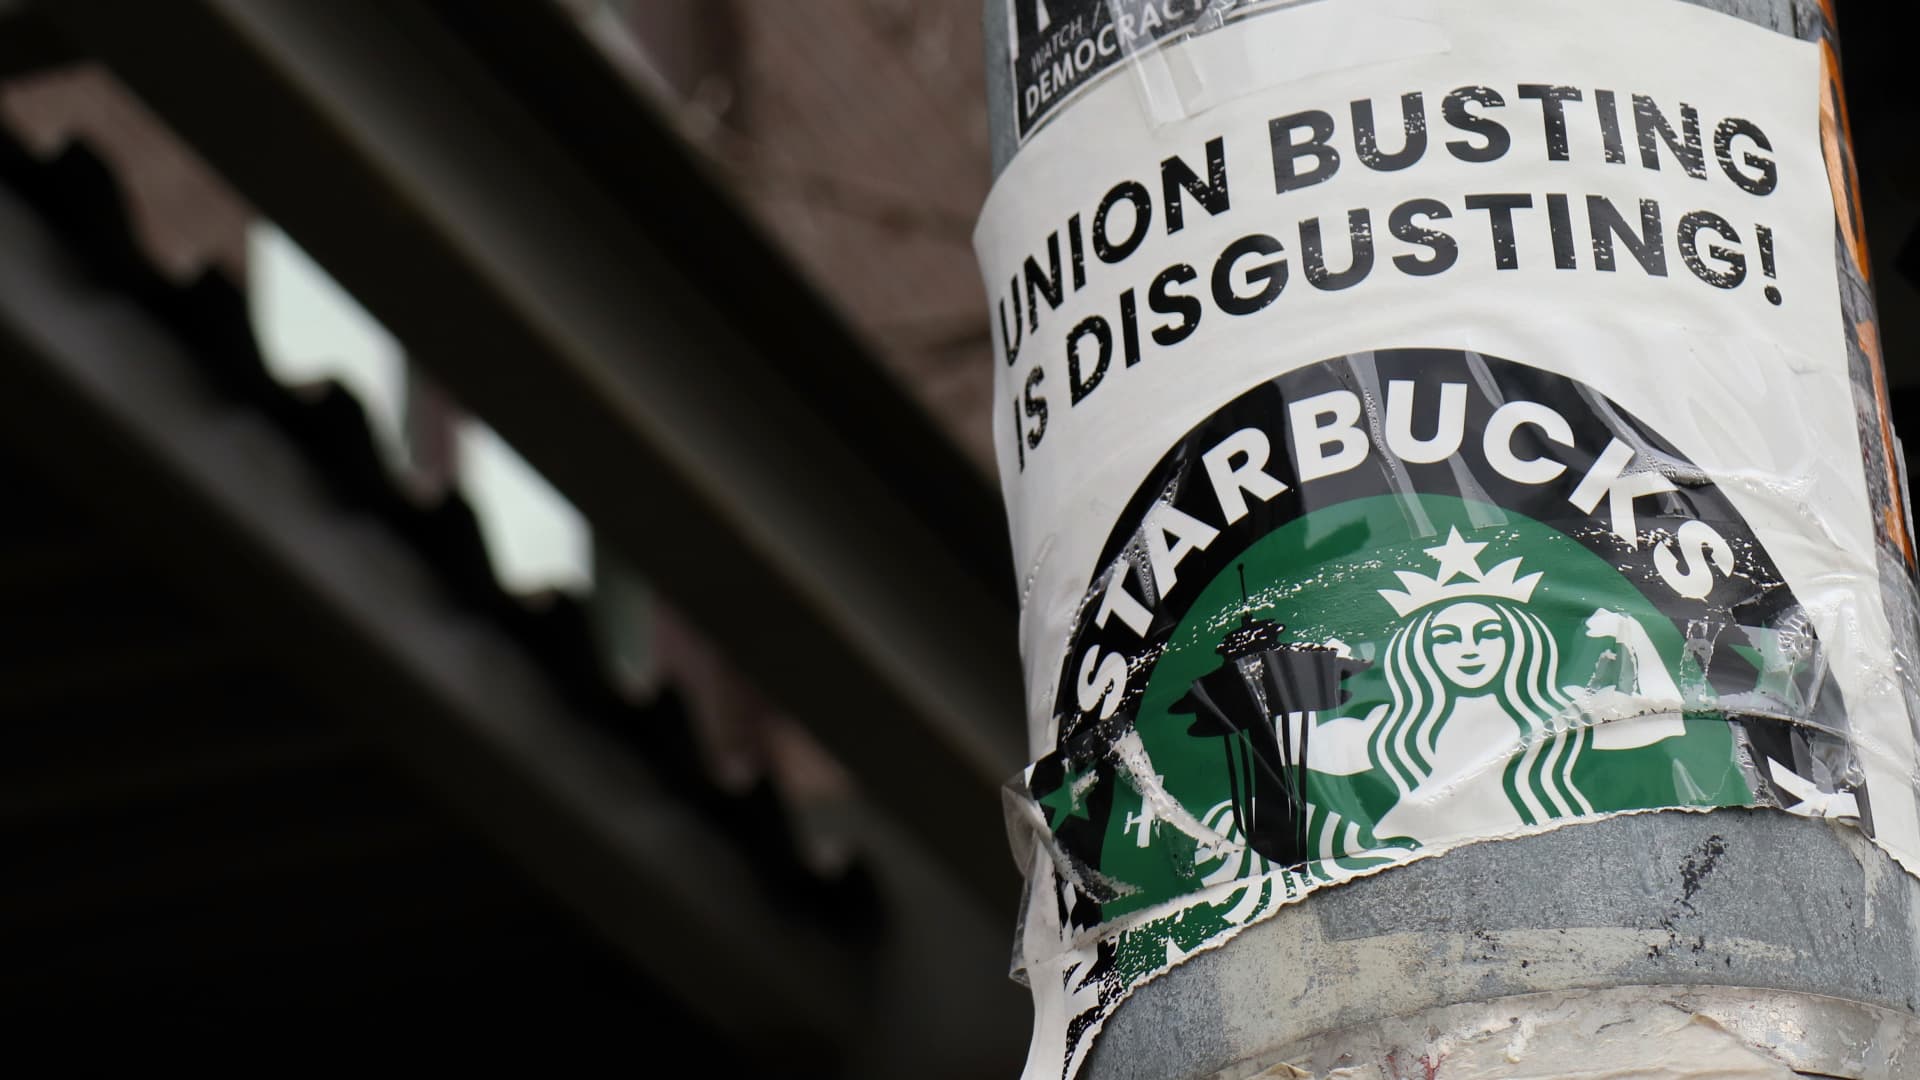 Union claims that Starbucks illegally closes the cafe in retaliation, Bloomberg reports